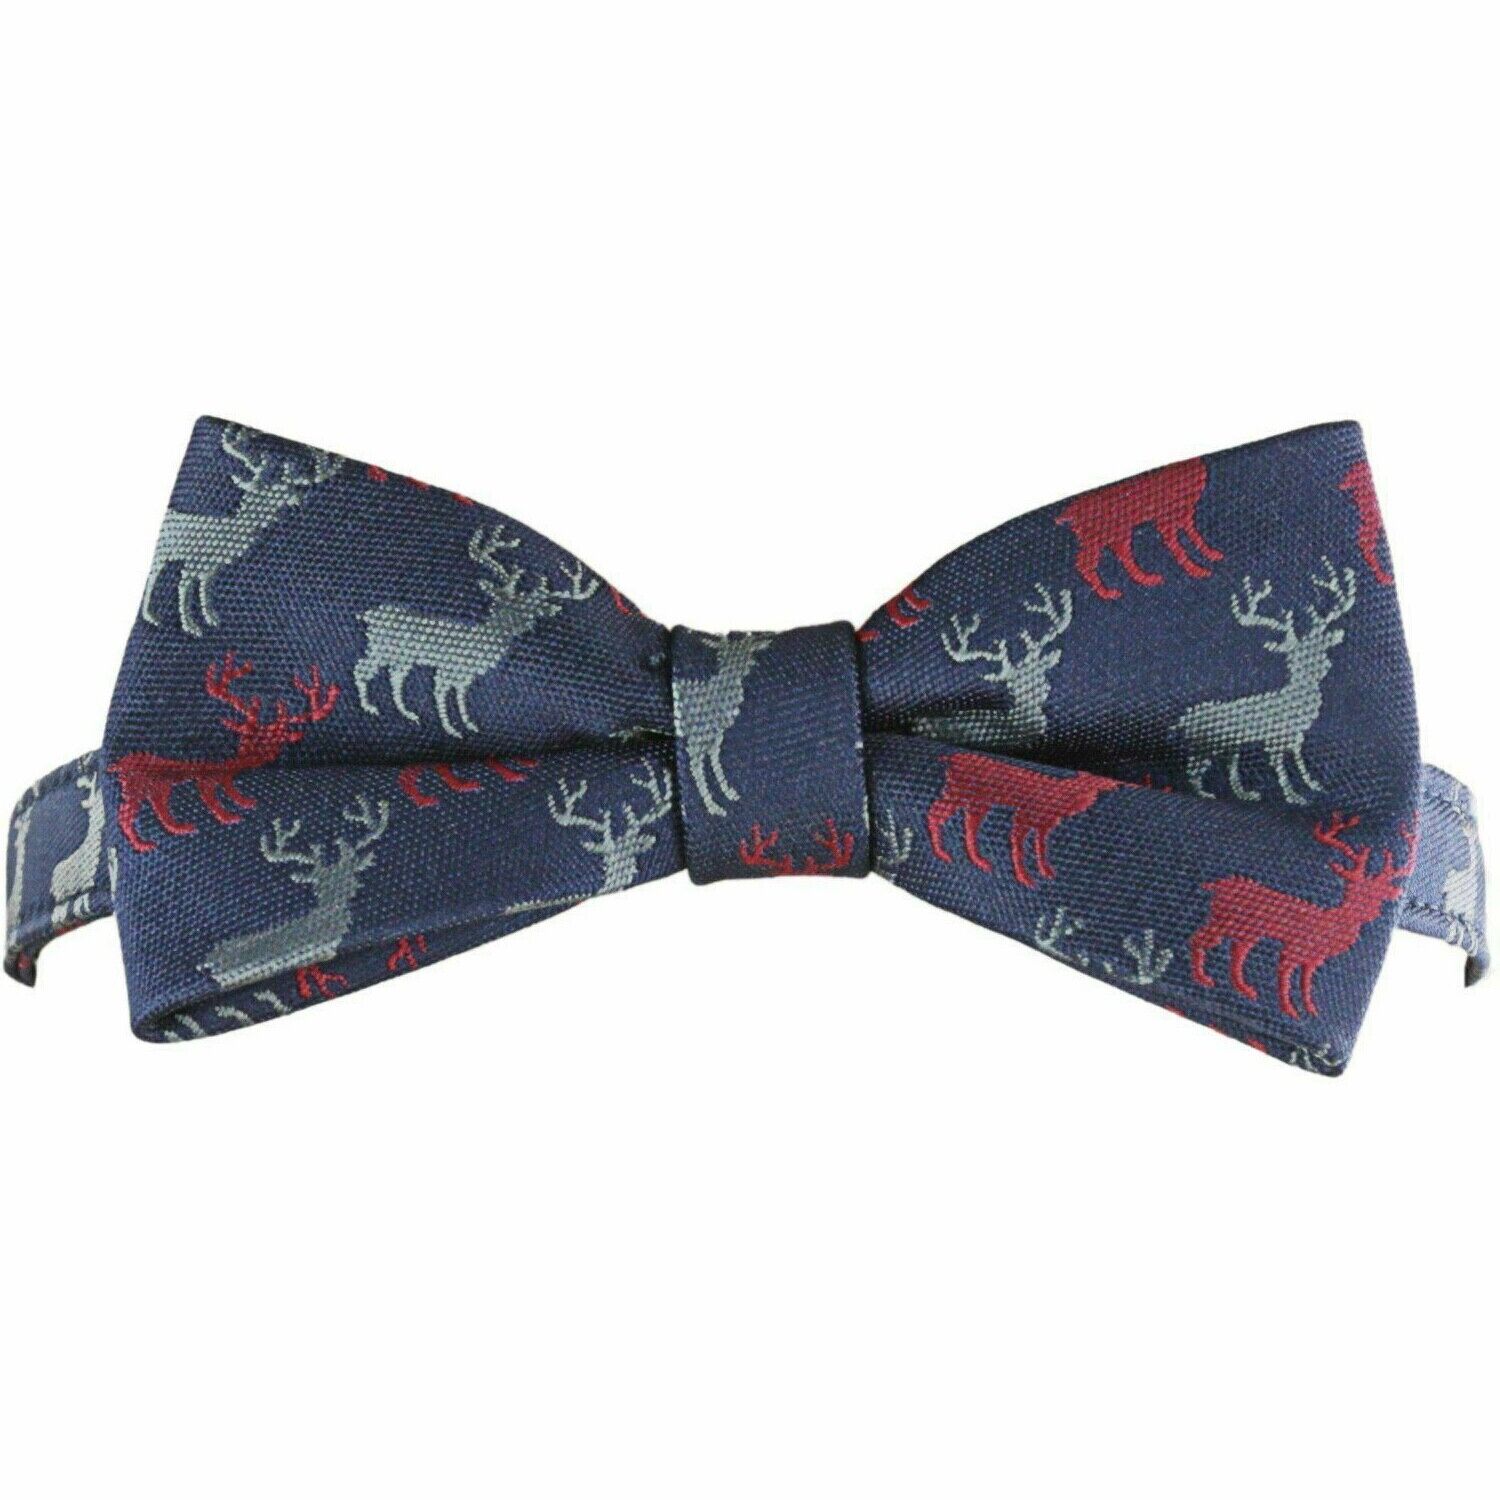 2 3 4 5 T Janie and Jack Navy blue Red BOW TIE holidays Toddler boy NWT